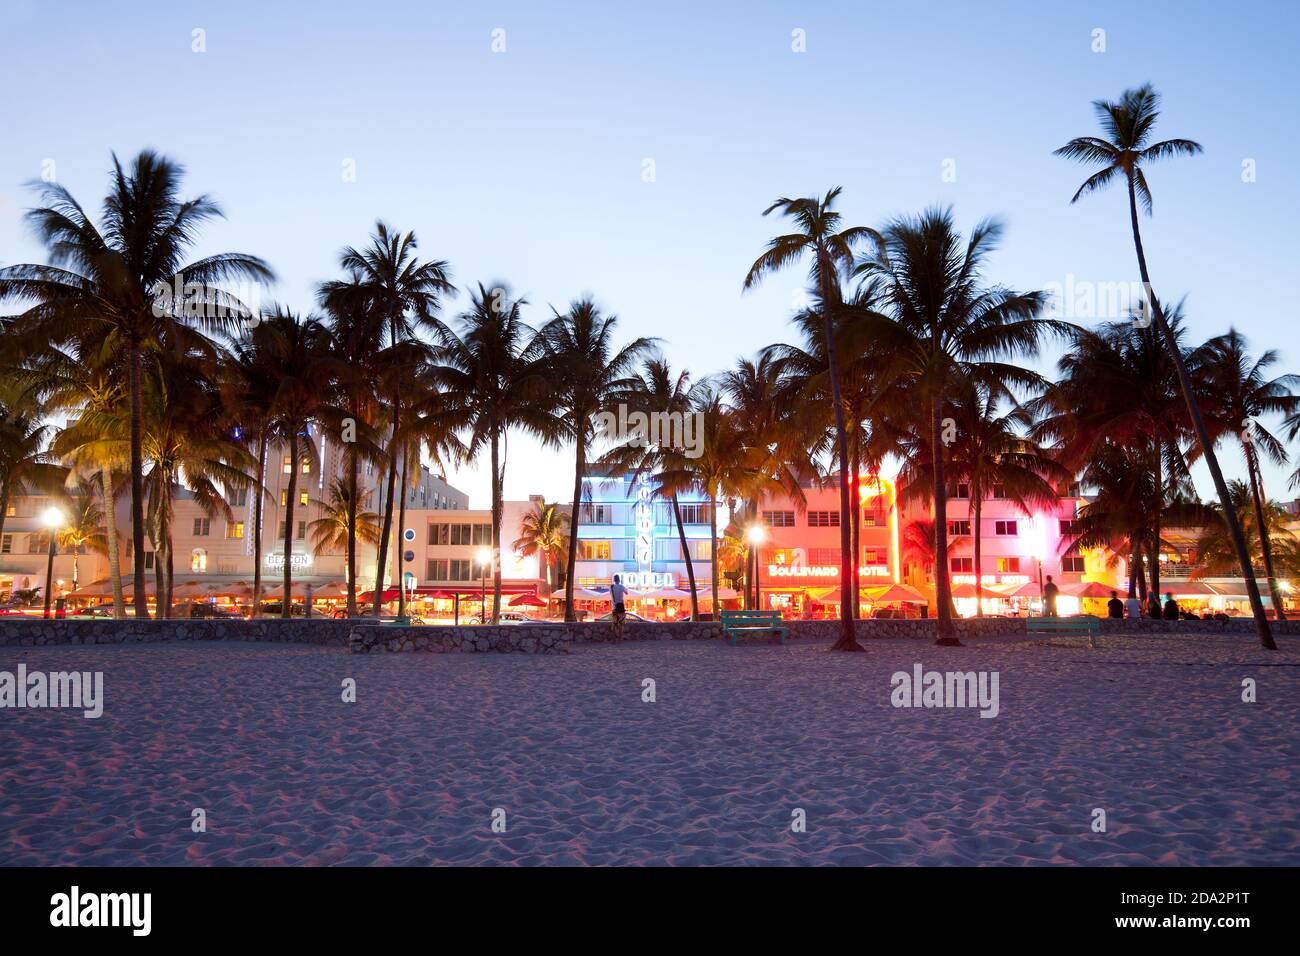 Miami, Florida, United States - Hotels, bars, restaurants and night life at Ocean Drive in South Beach. Stock Photo